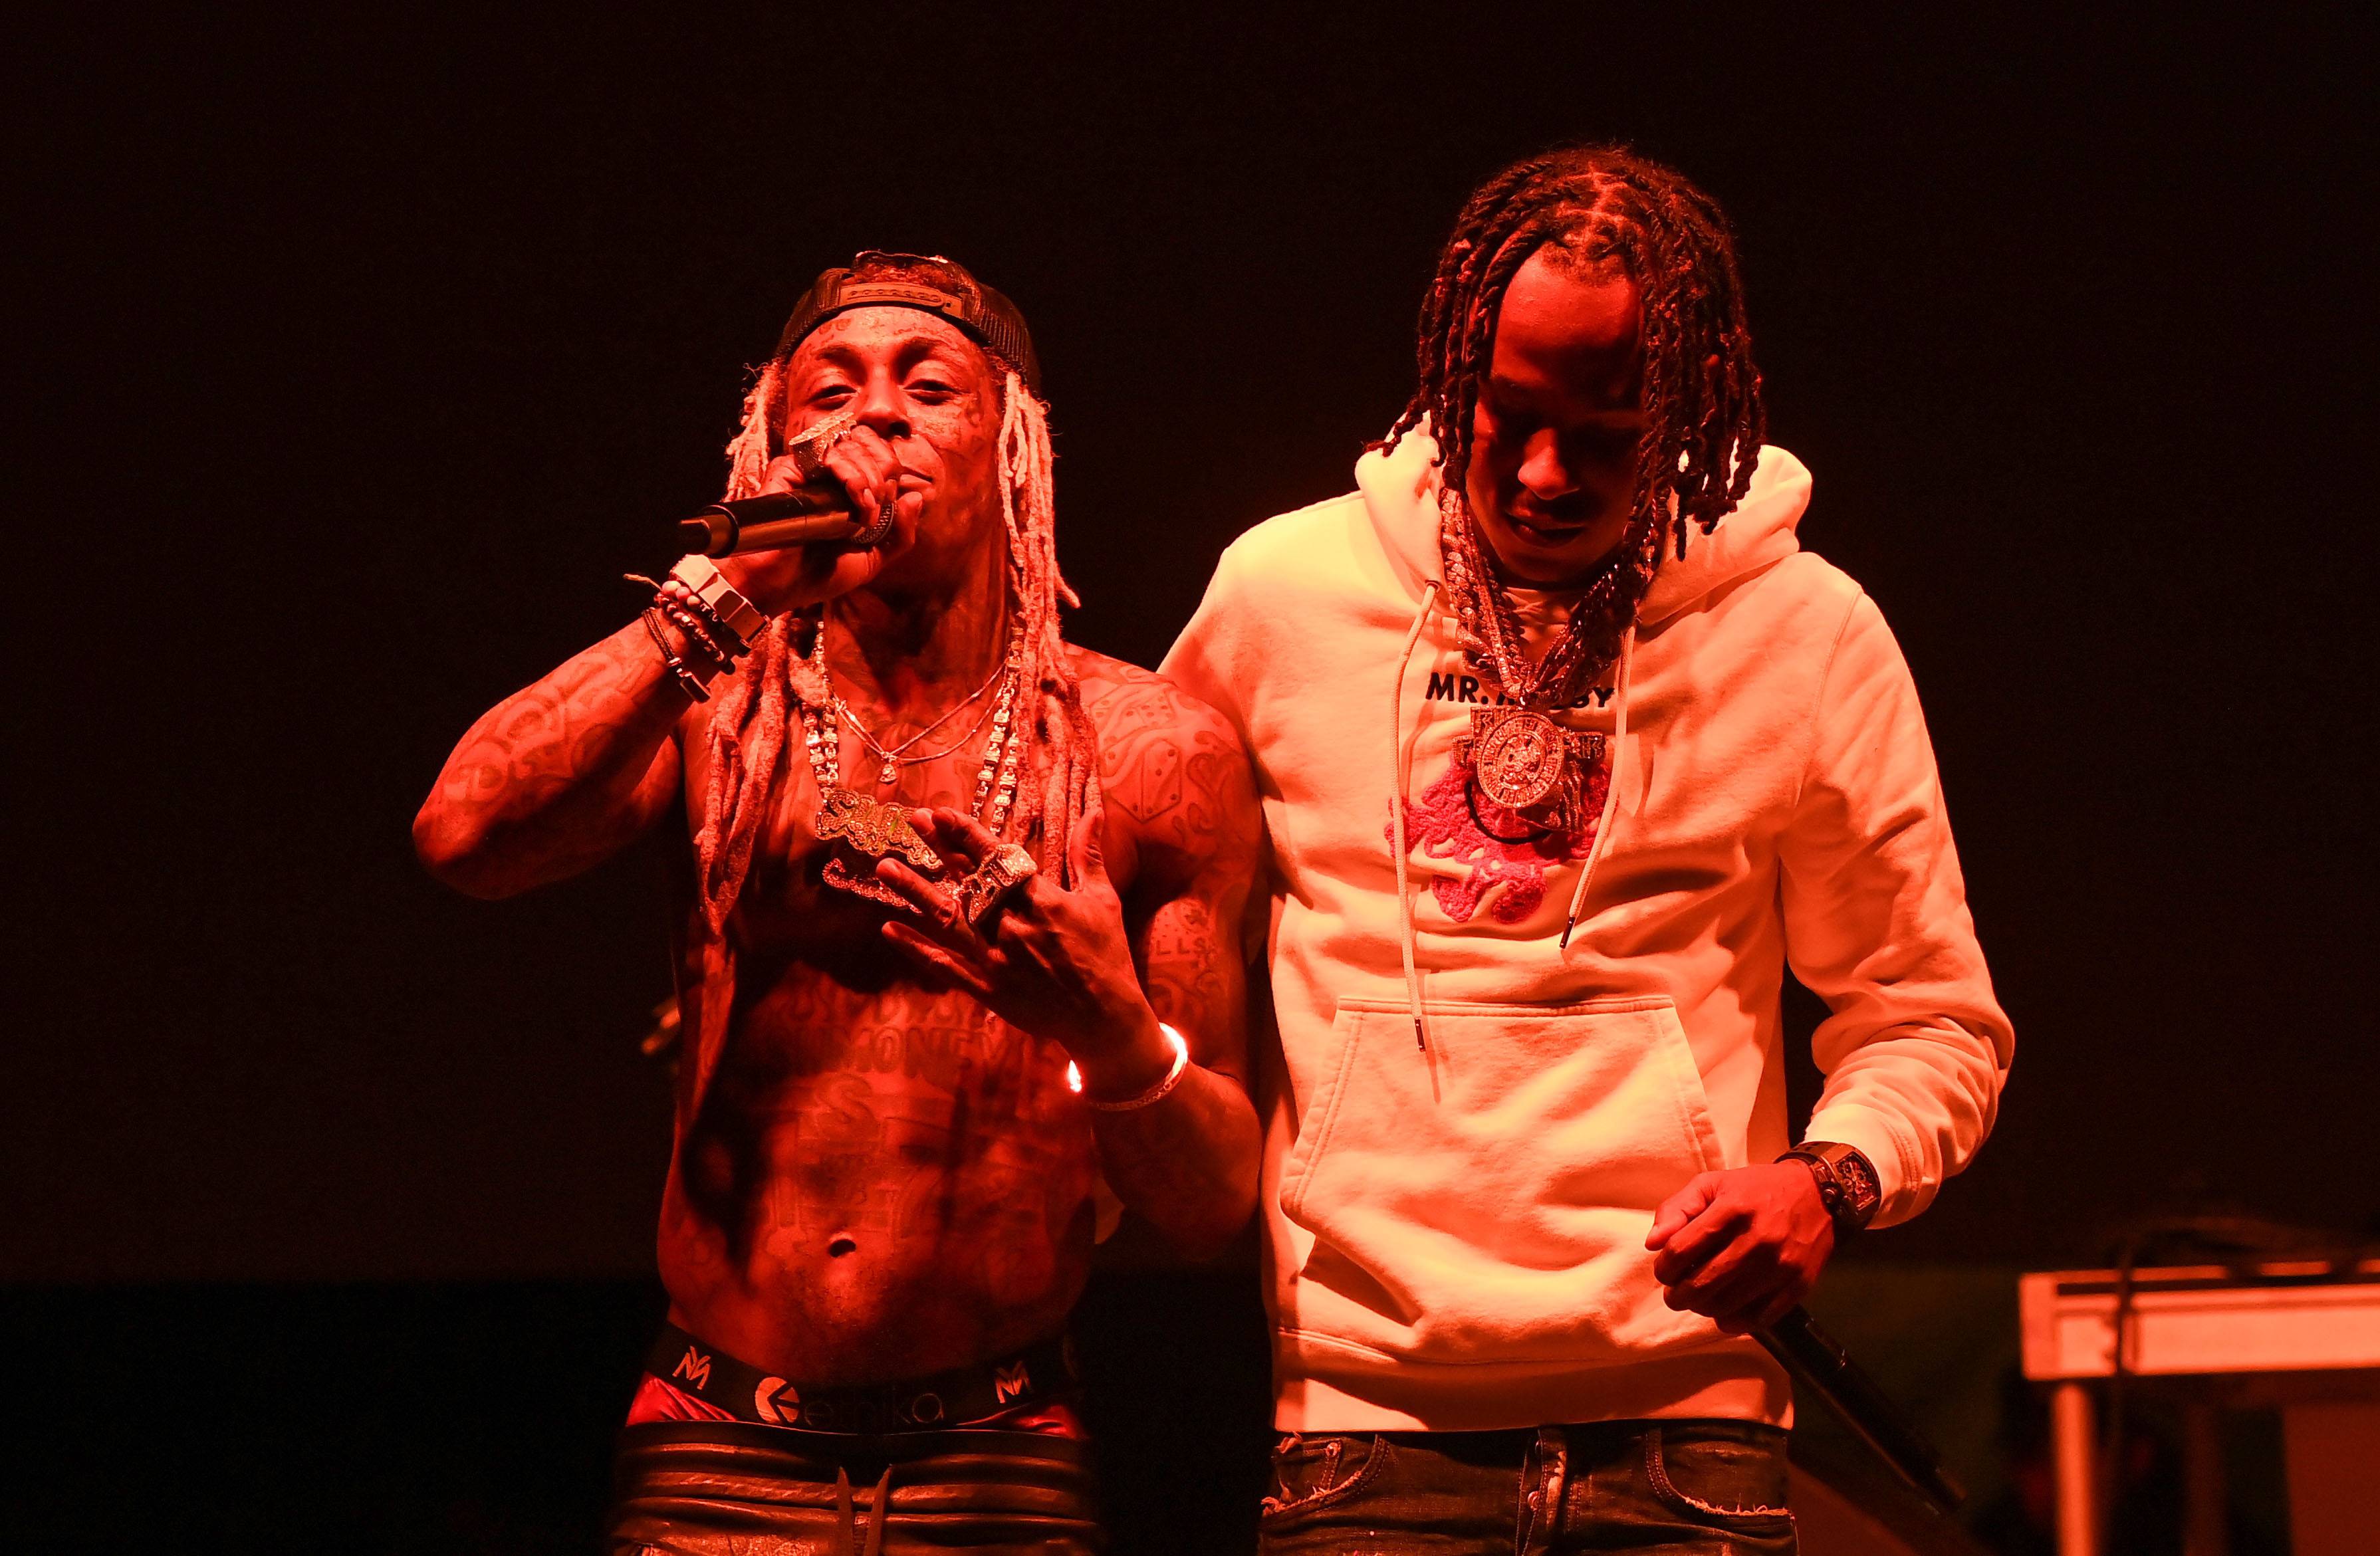 Lil Wayne and Rich The Kid on BET Buzz 2021